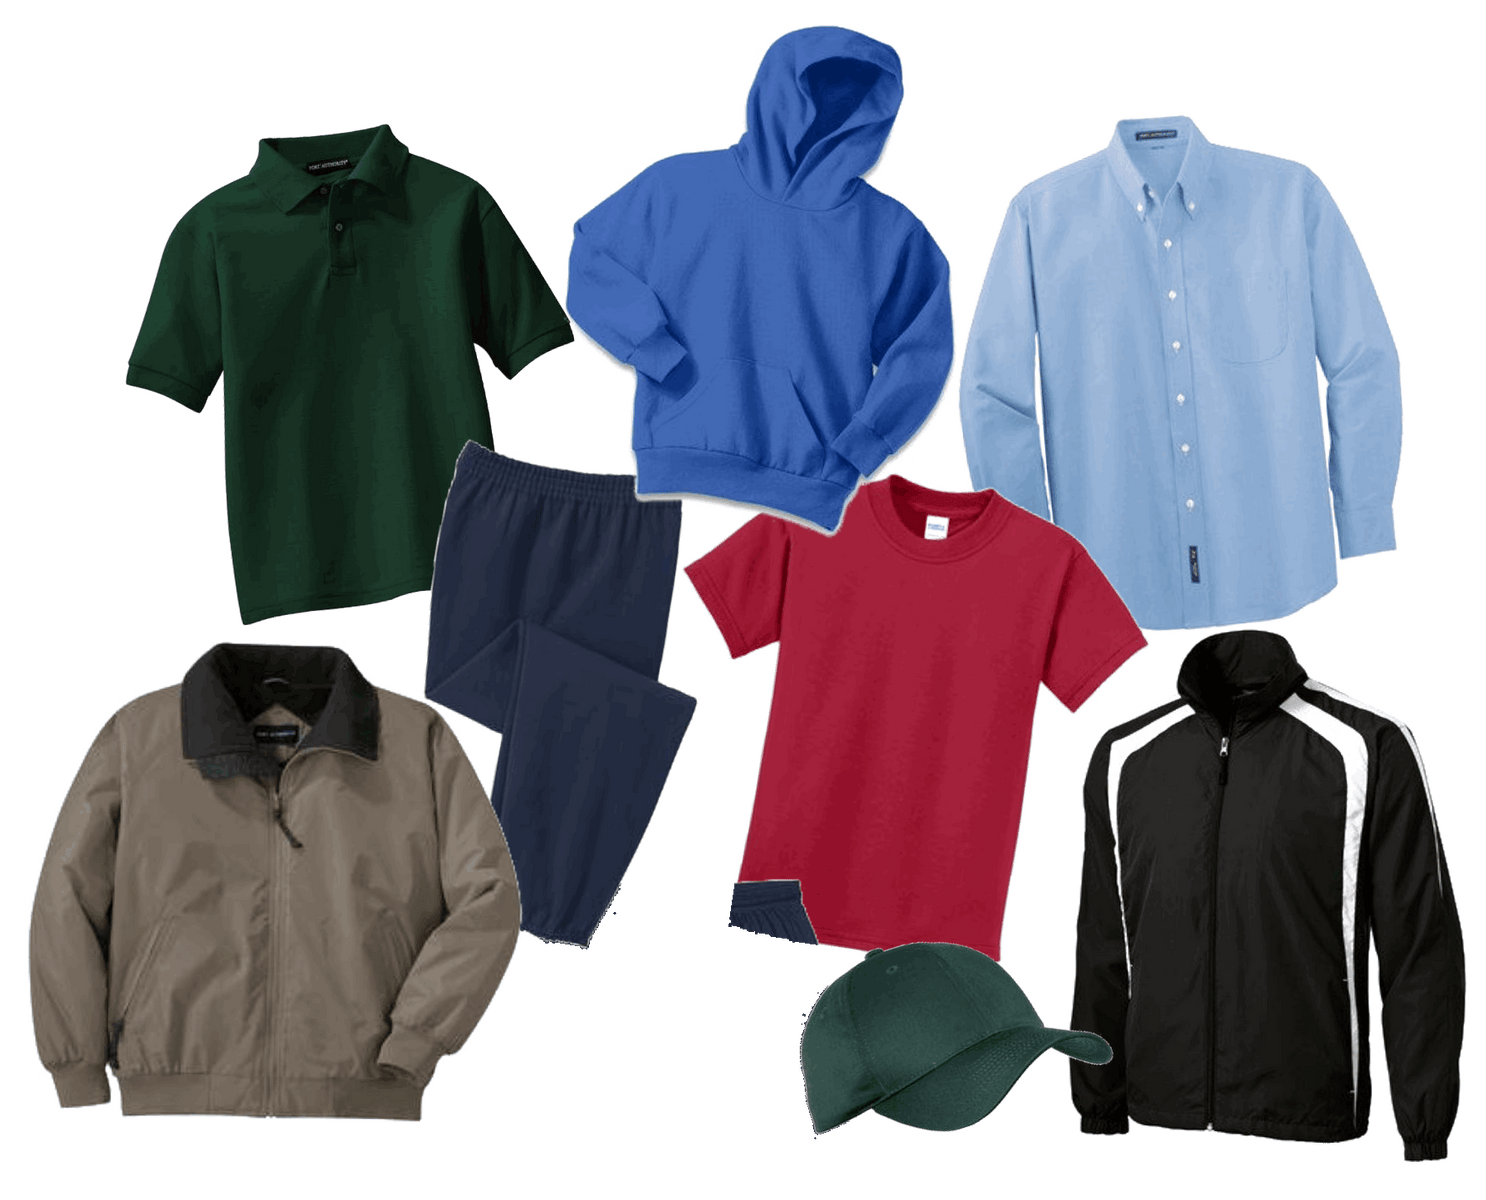 various apparel available included jackets, button up short sleeve and long sleeve shirts, a hat, a hooded sweatshirt, and zip up jacket